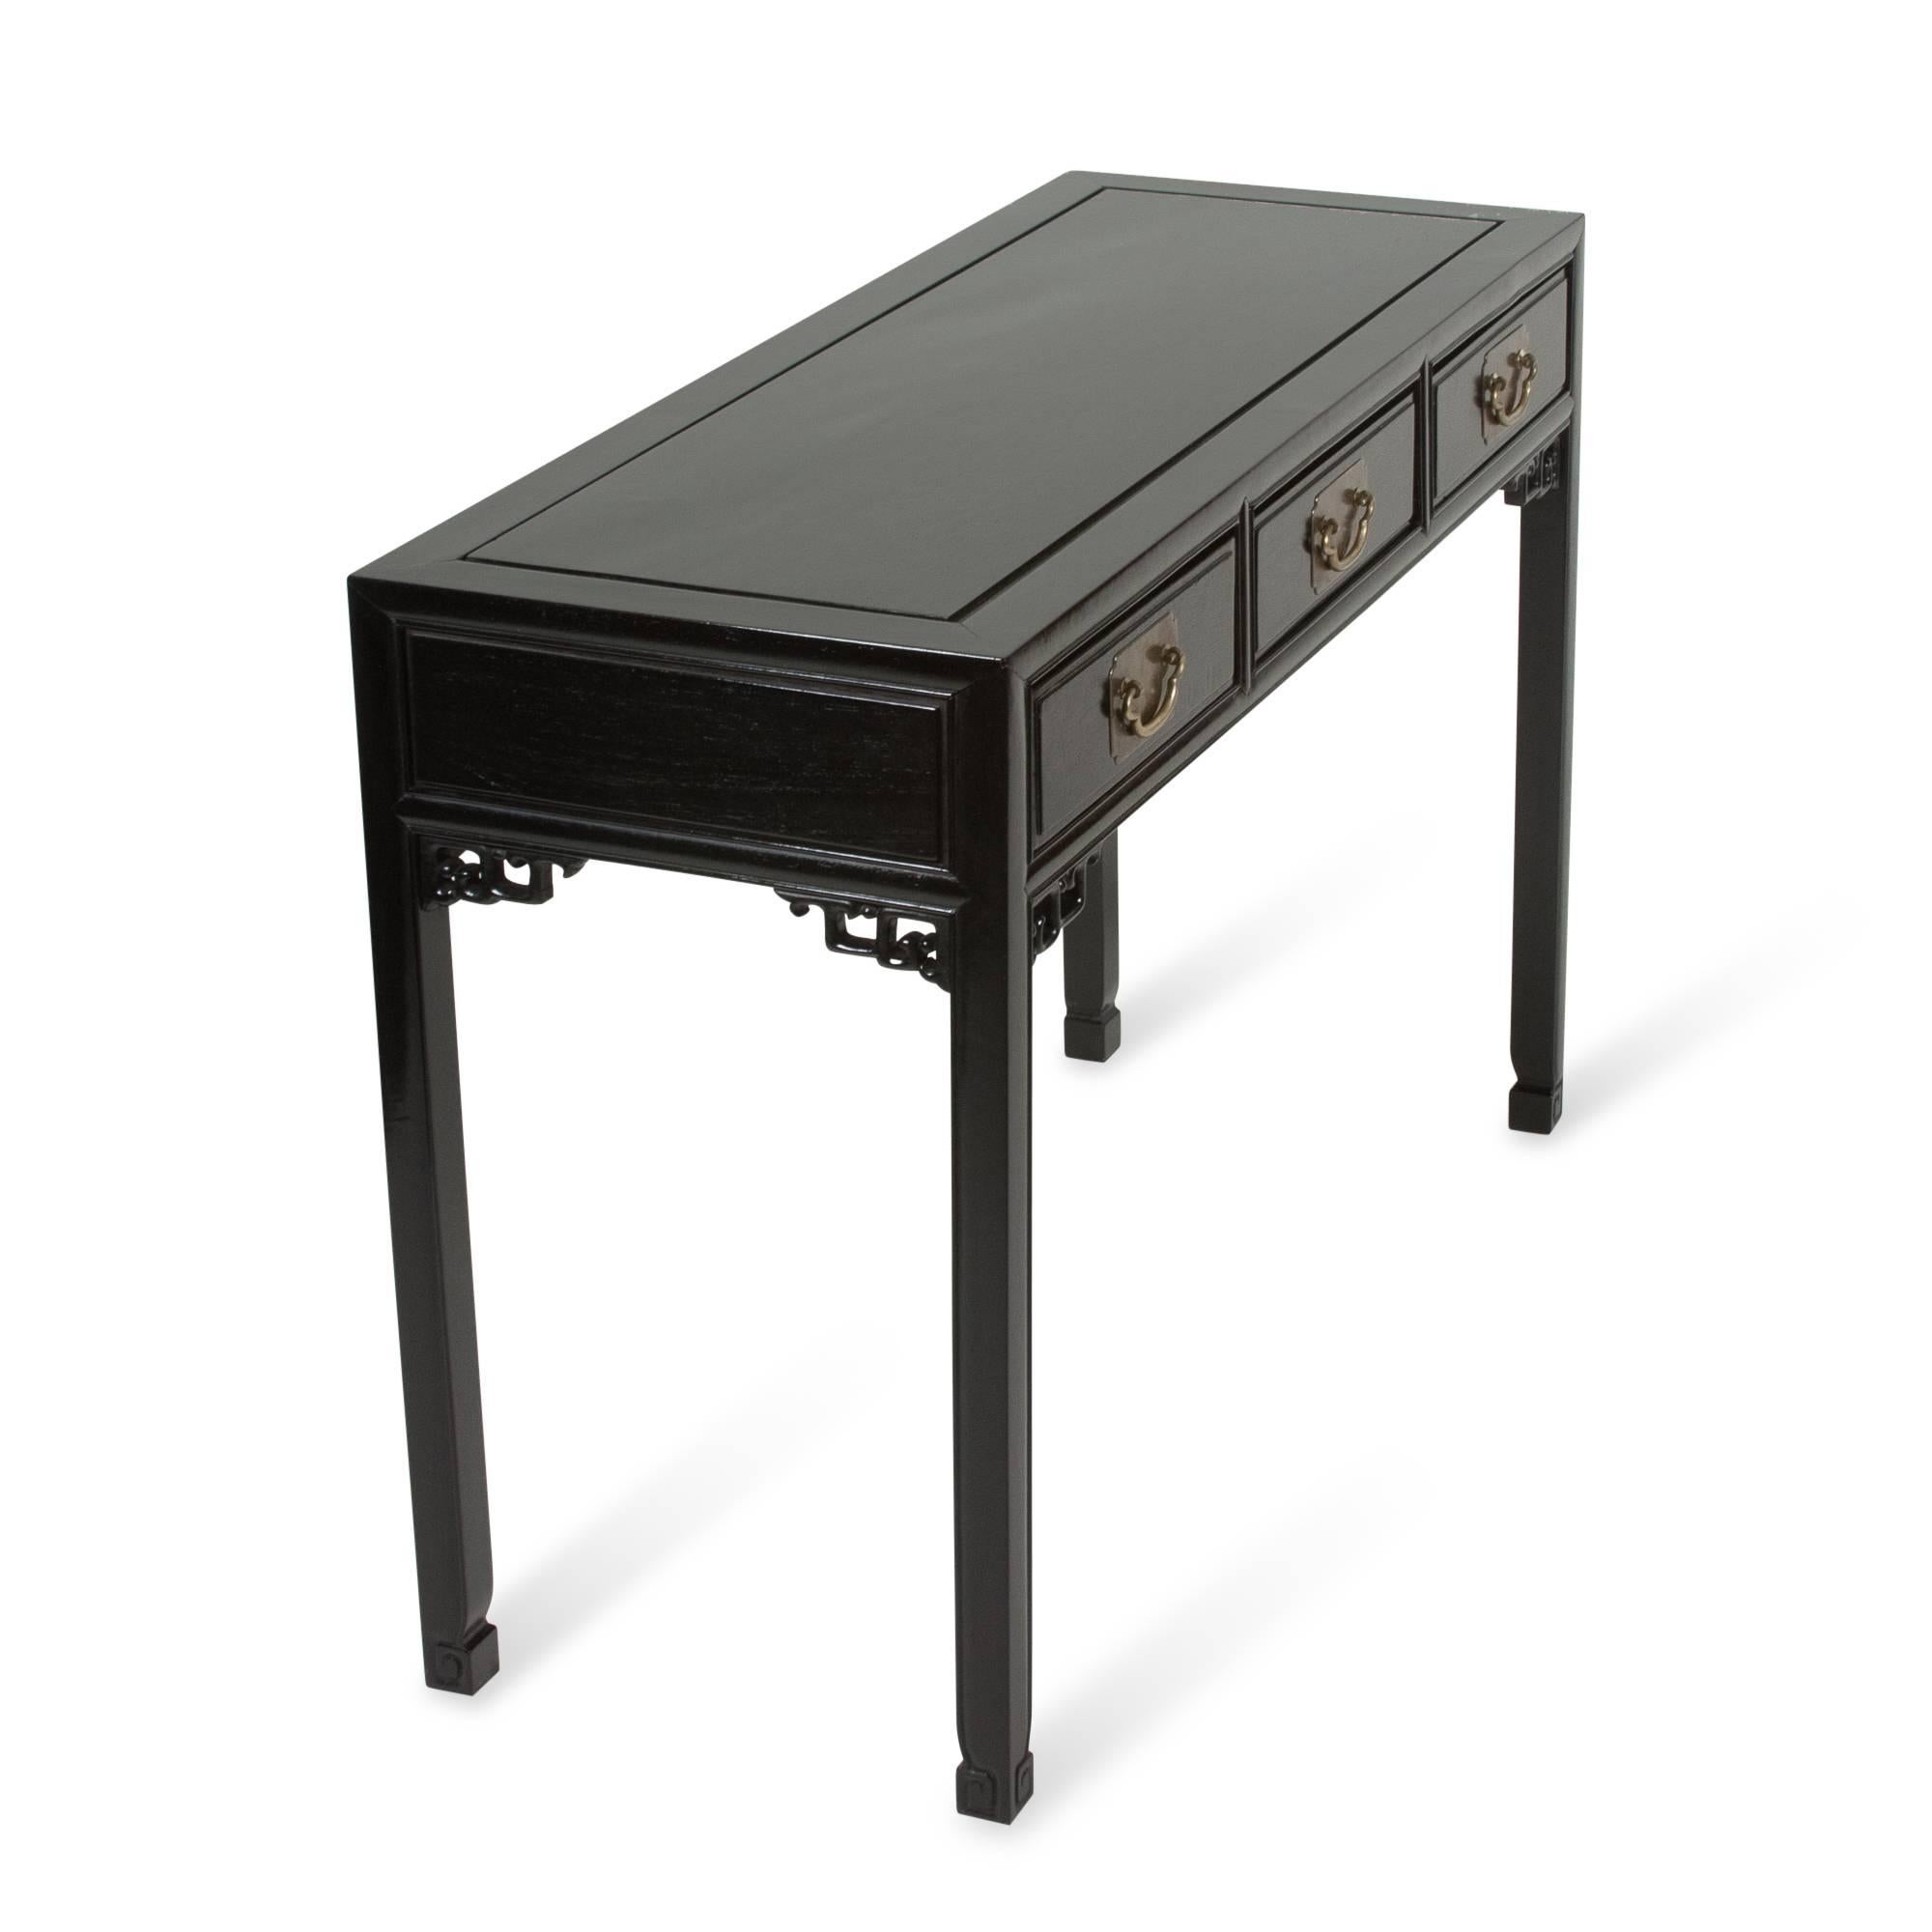 Mid-20th Century Black Lacquered Chinese Fretwork Desk, 1960s